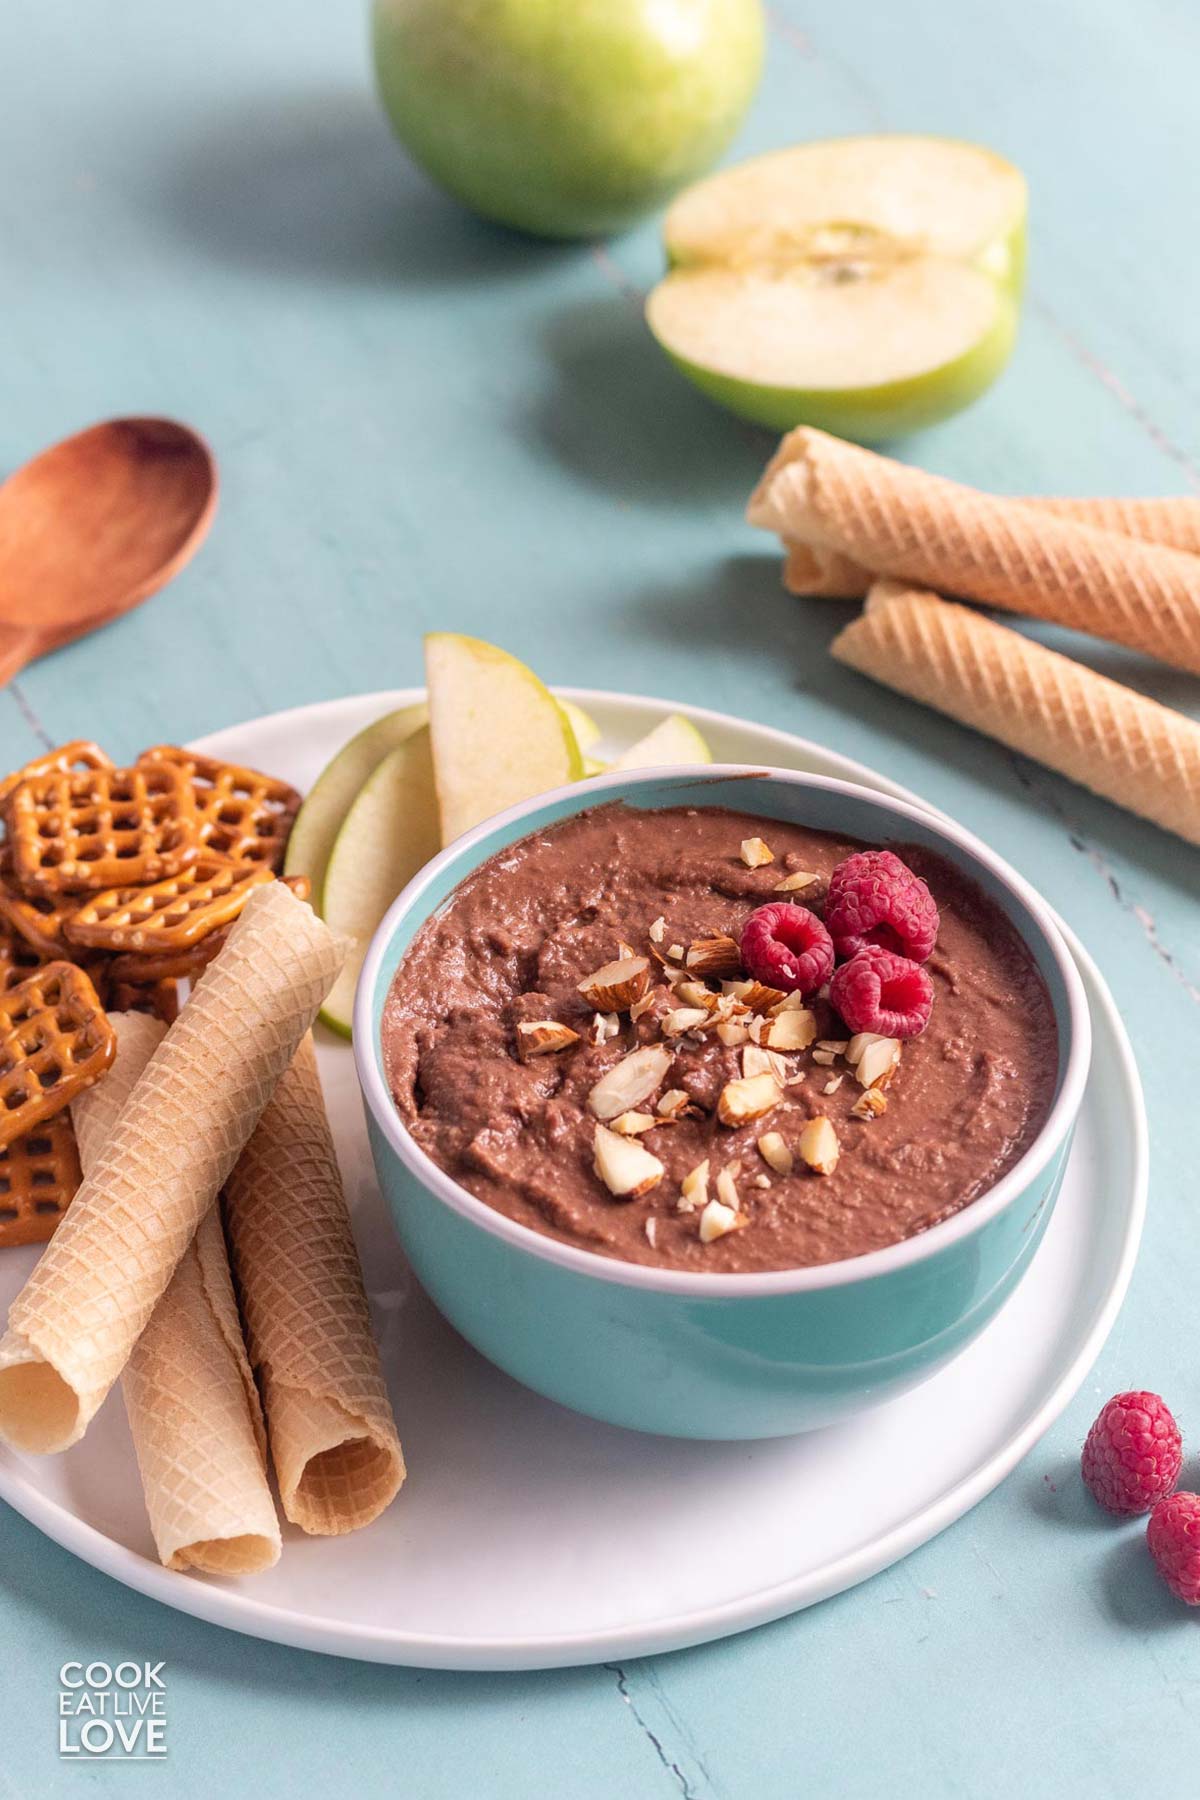 Chocolate dessert hummus in a bowl on a table with fruit and cookies.